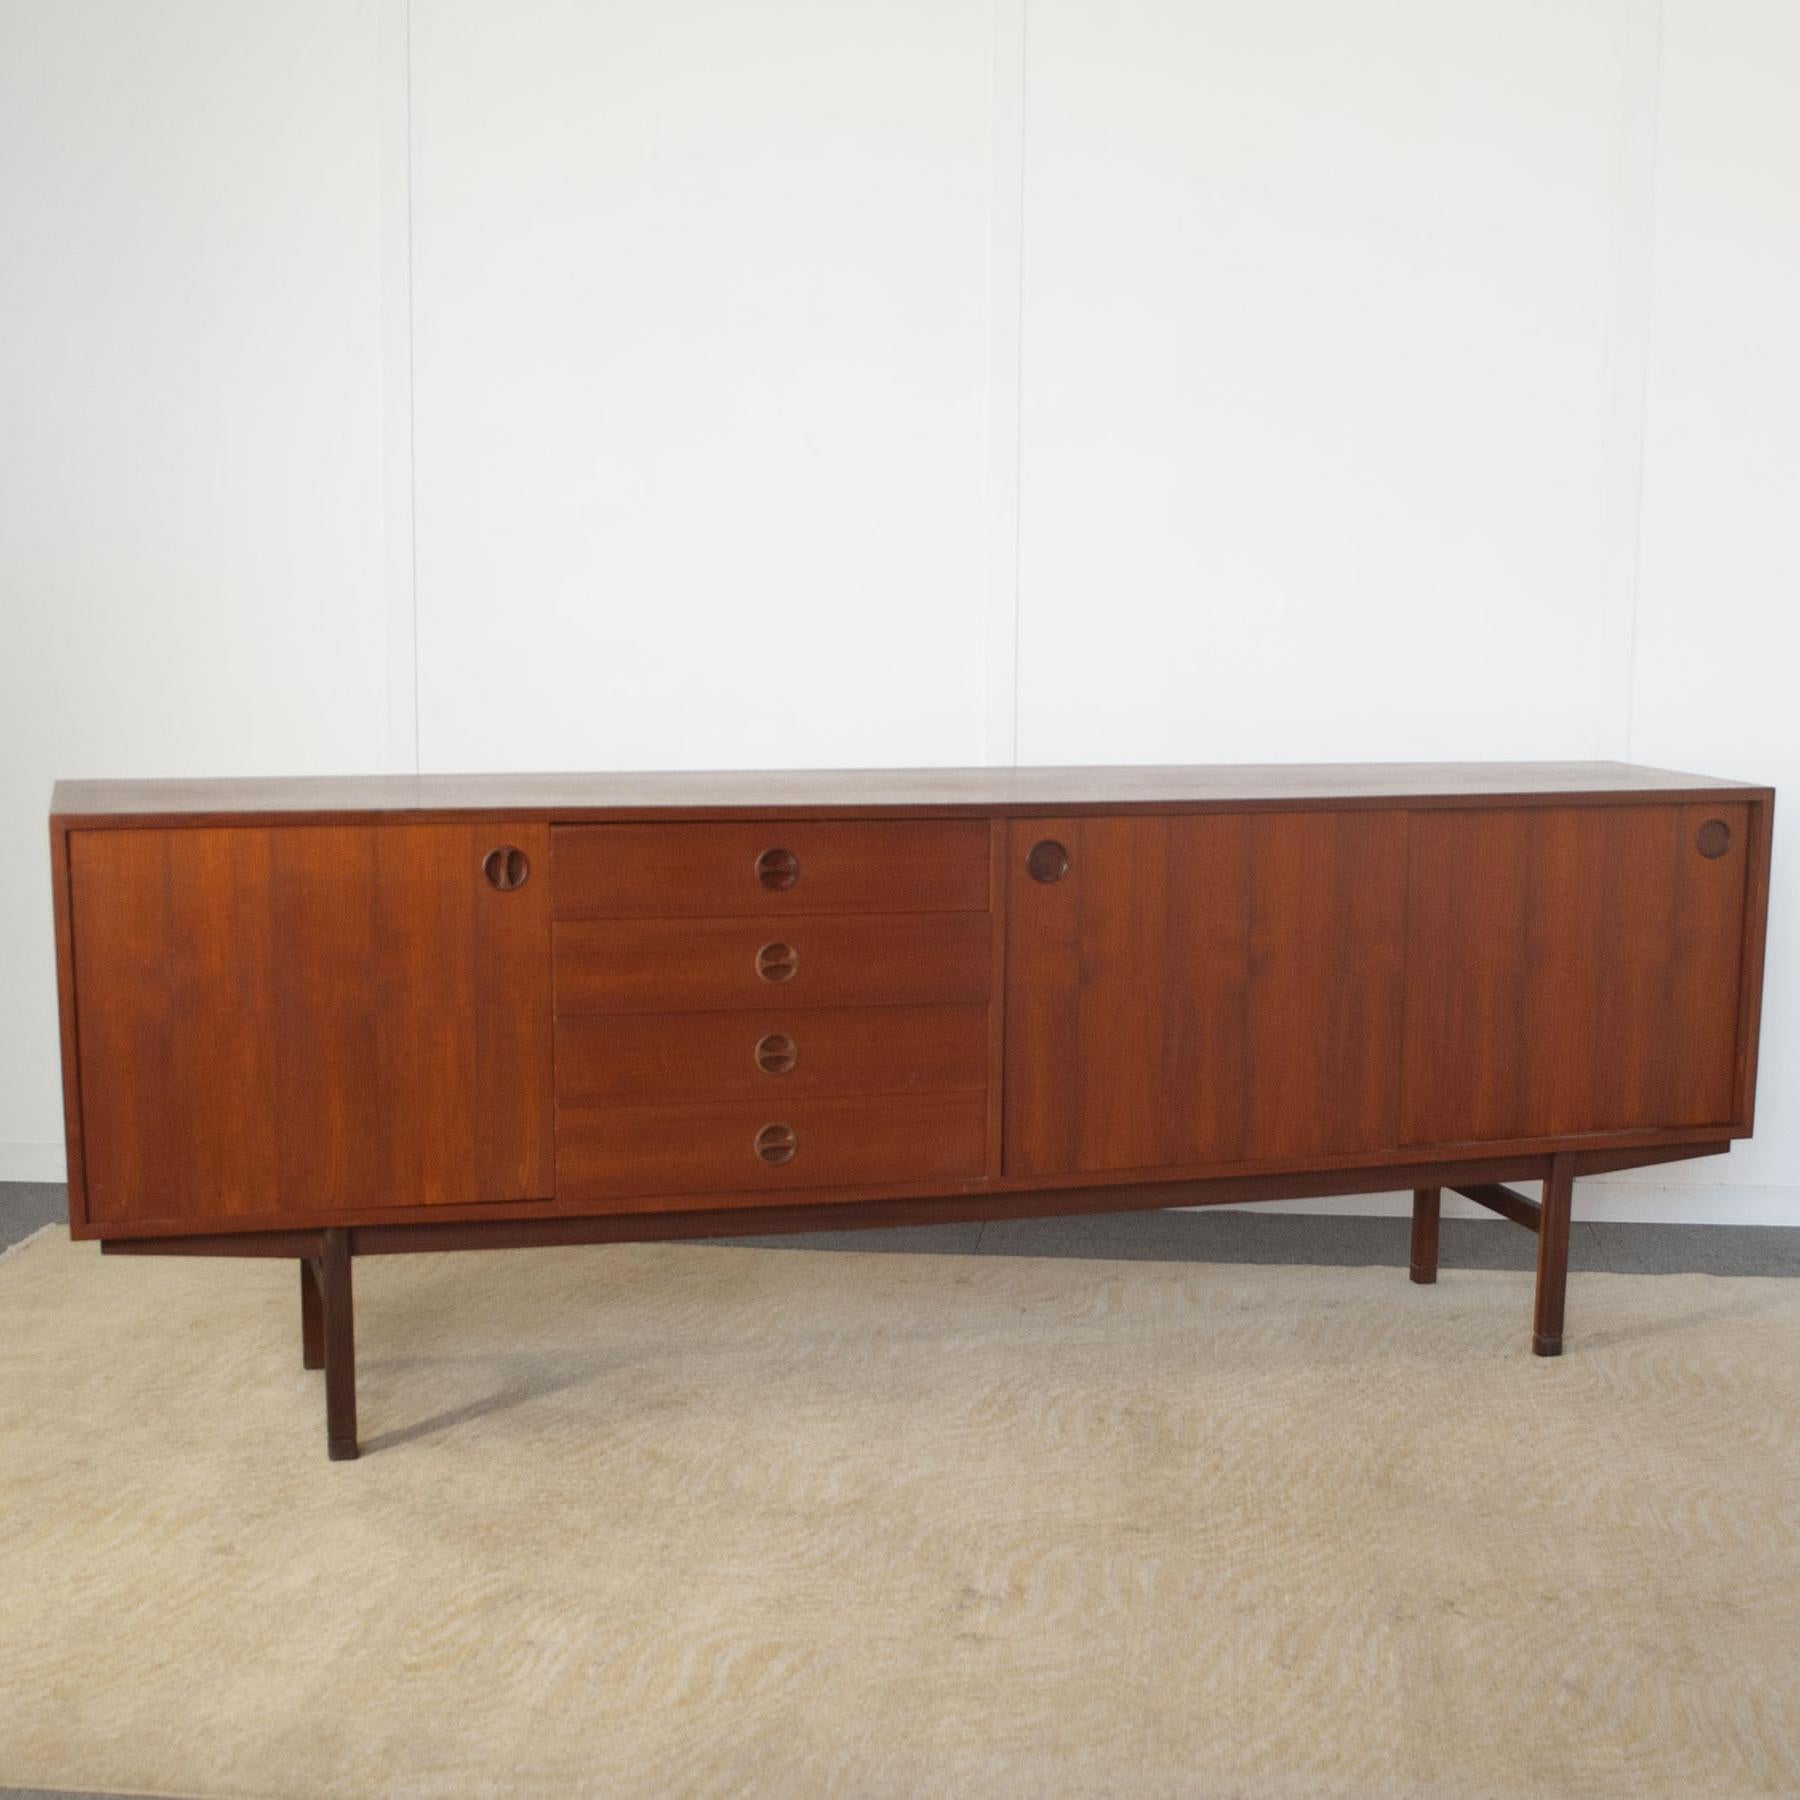 Walnut wood sideboard composed of four compartments one with 4 drawers the other three containing doors two of which slide in the style of designer Georges Nelson, 1960s production.